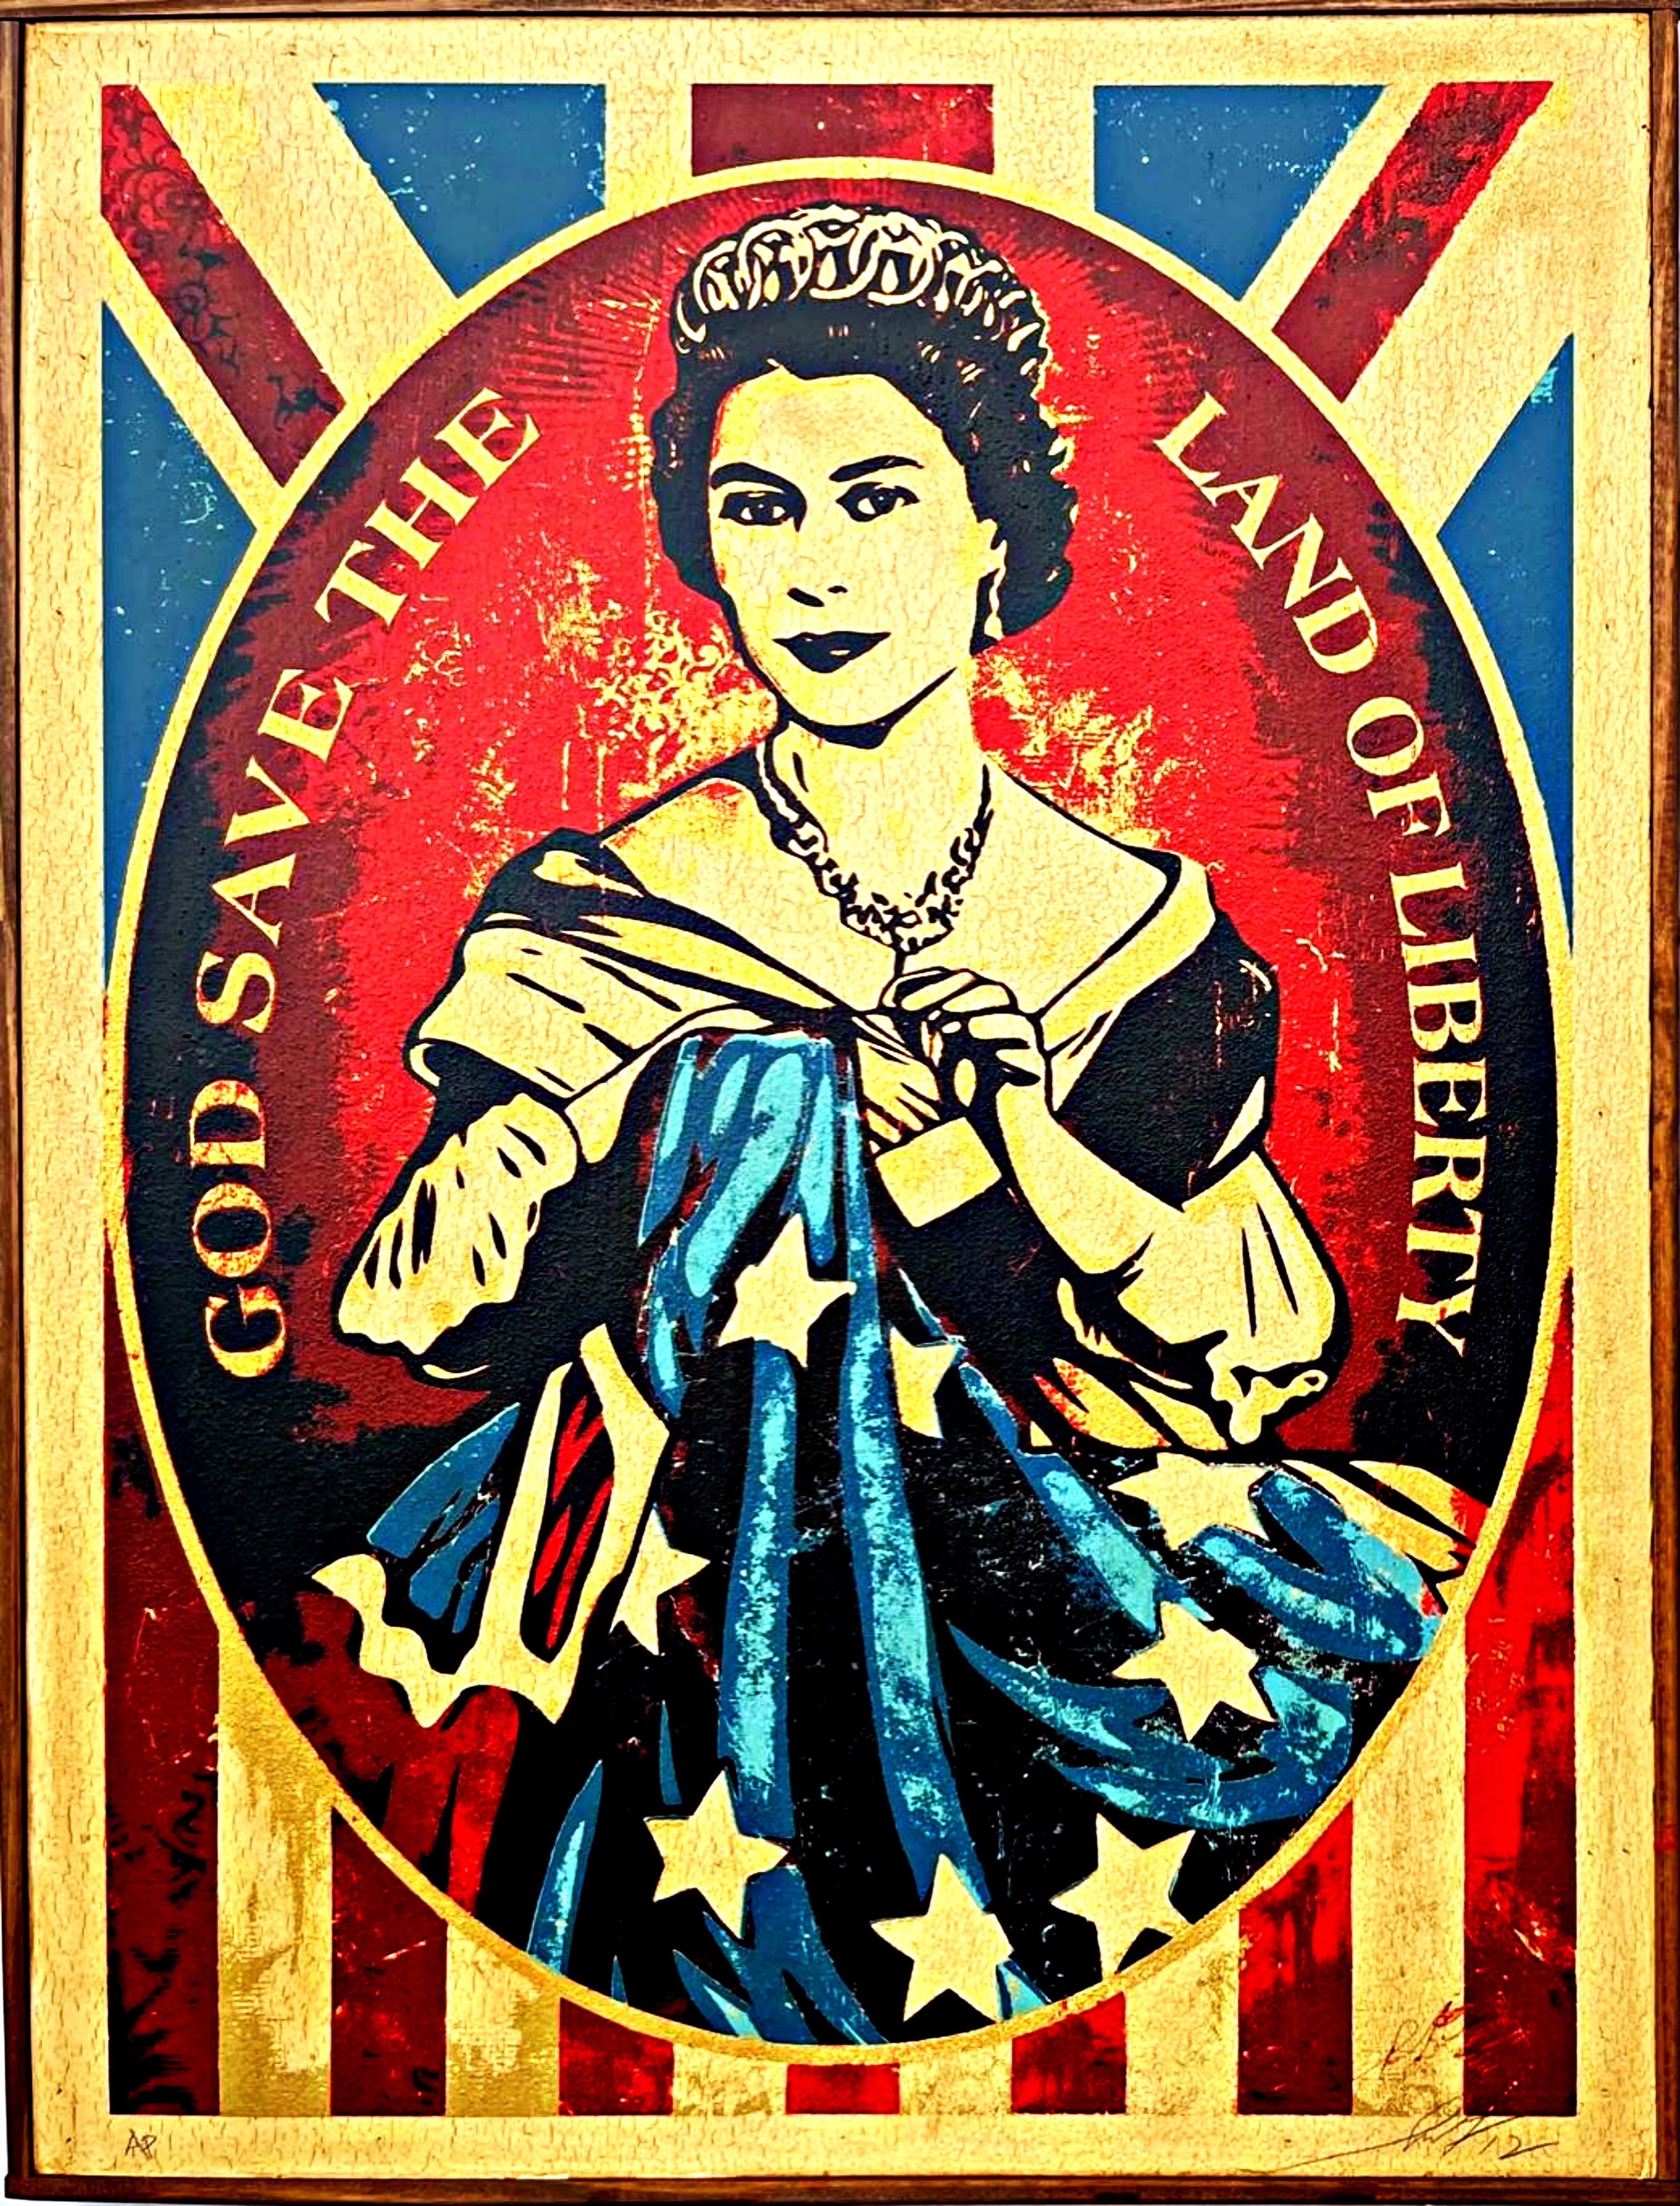 Shepard Fairey Portrait Print - God Save the Queen Homage to Queen Elizabeth II, rare signed work on wood panel 